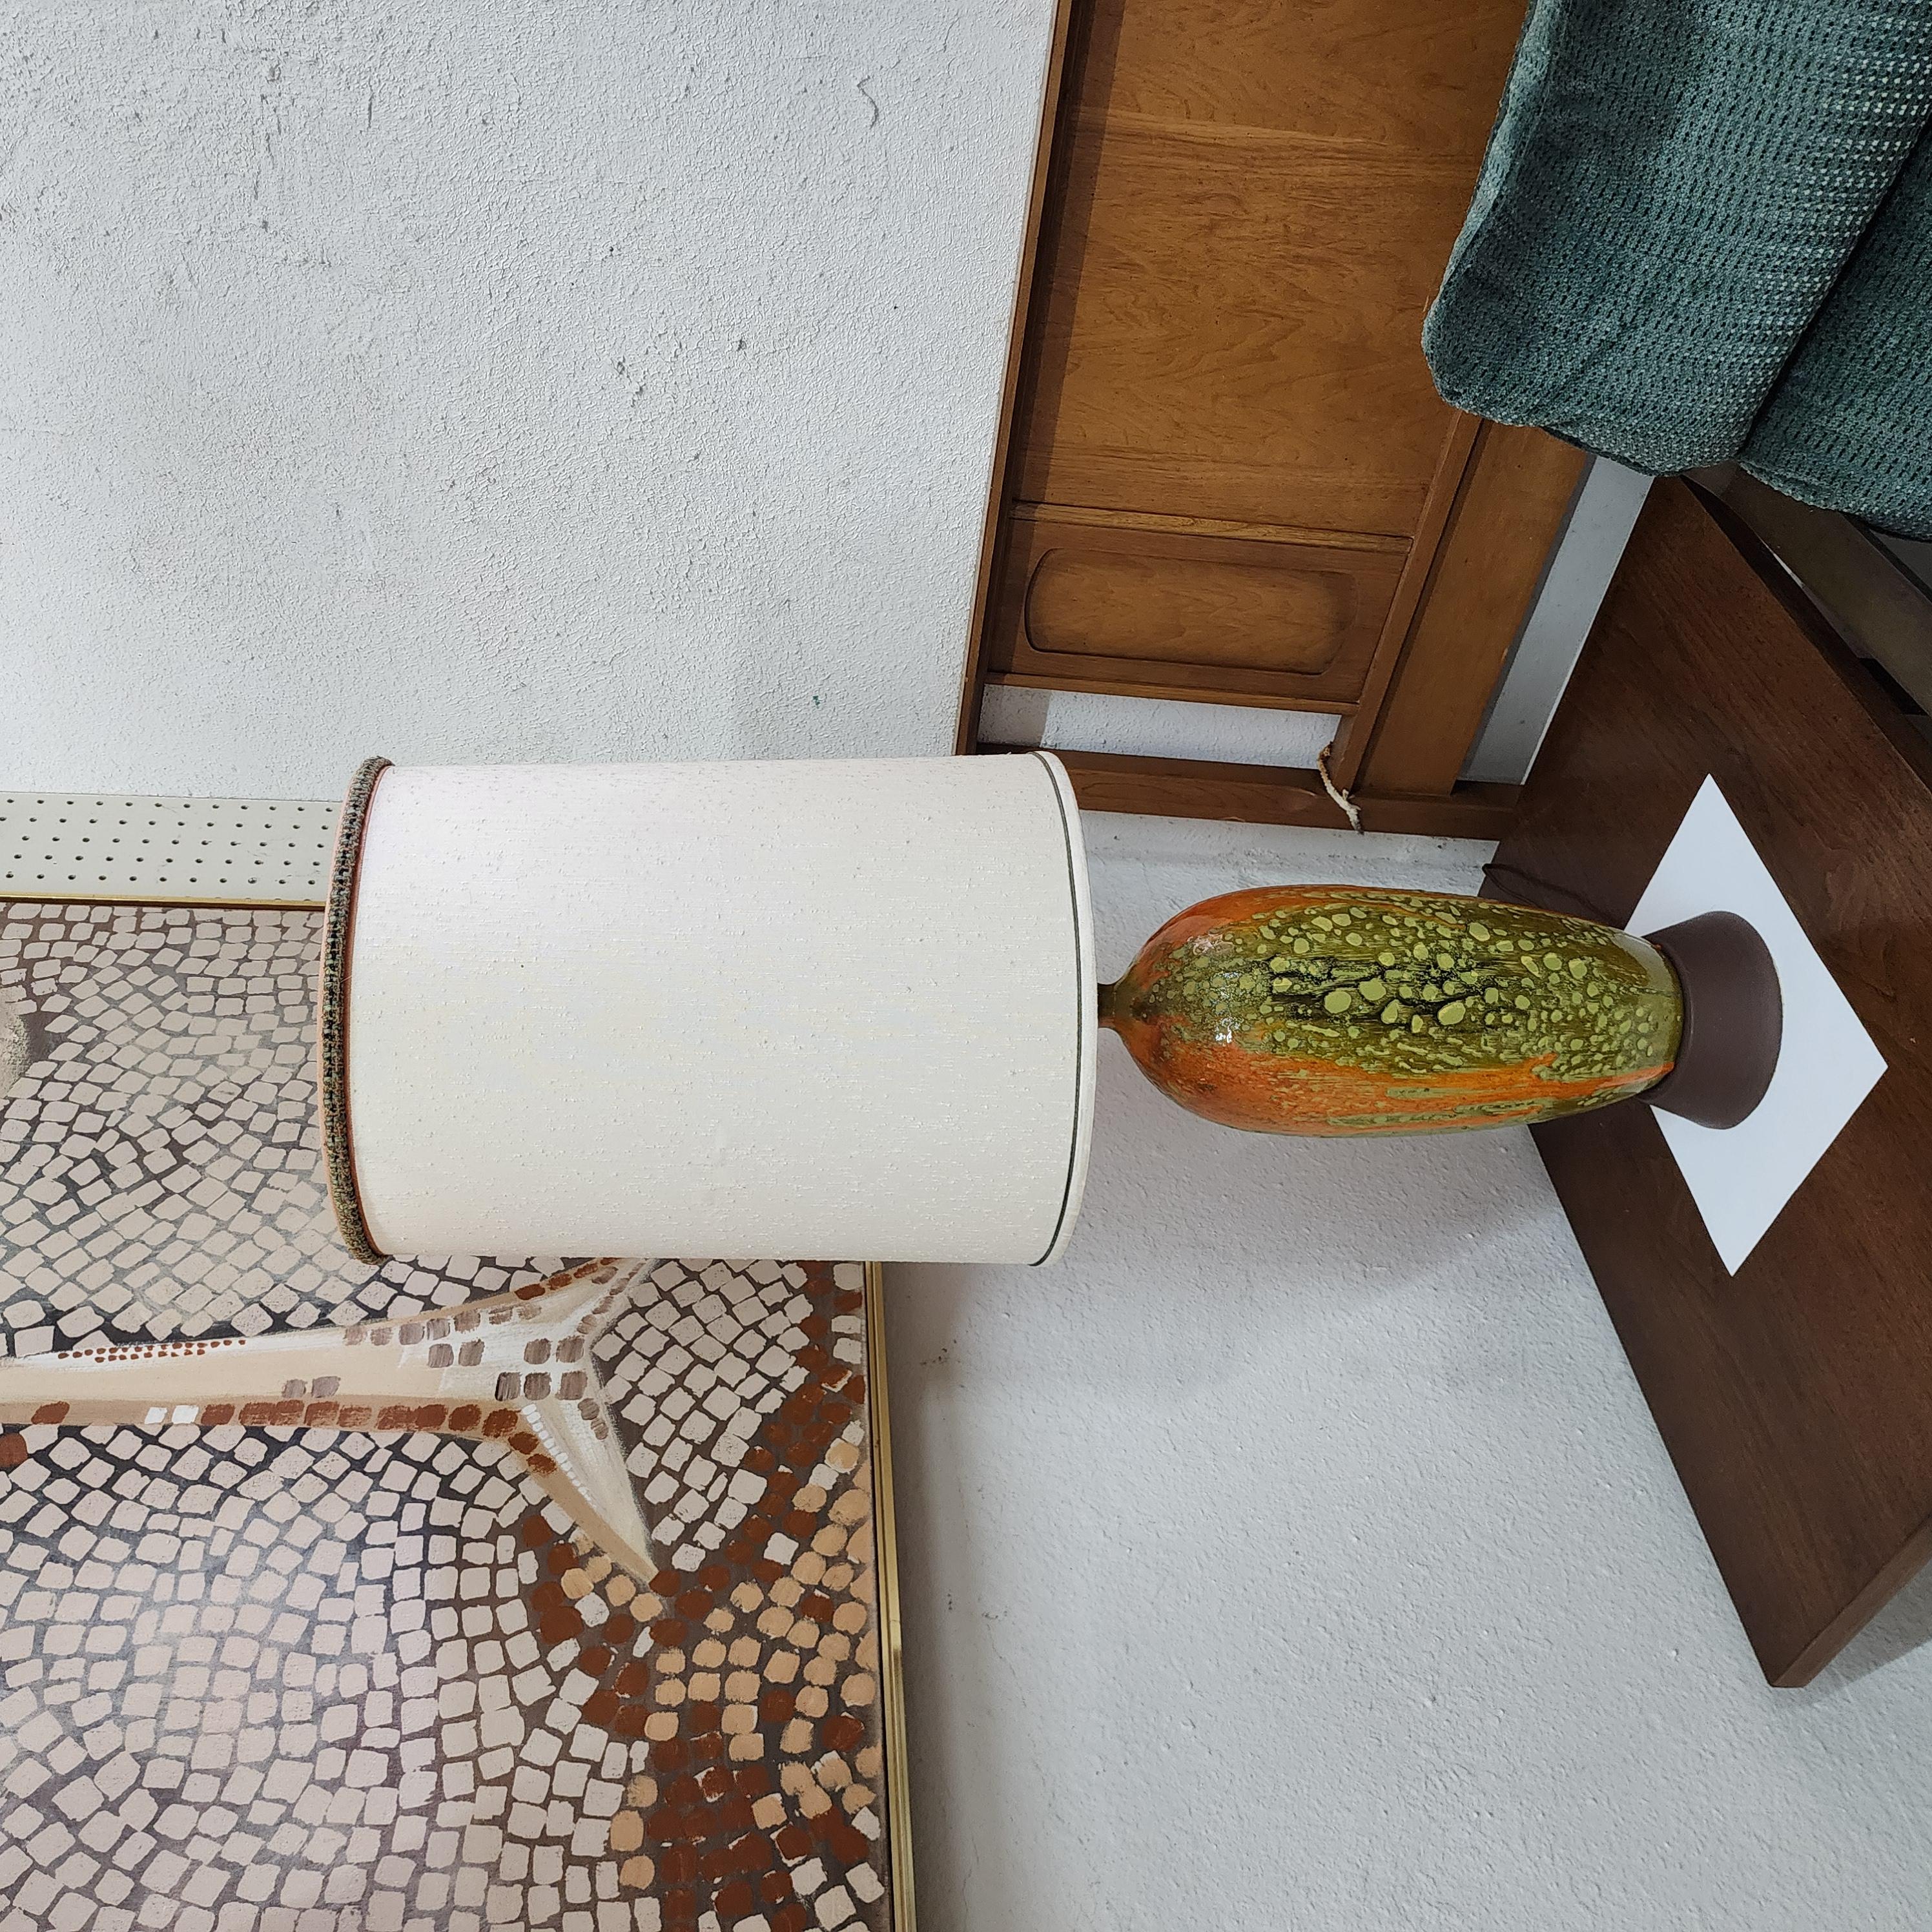 This is a unique mid-century lava glazed ceramic lamp. It has beautiful texture and has brilliant shades for avocado green and orange. It has a green felt bottom to protect the surface it is on. This would be eye catching and stunning in any home,